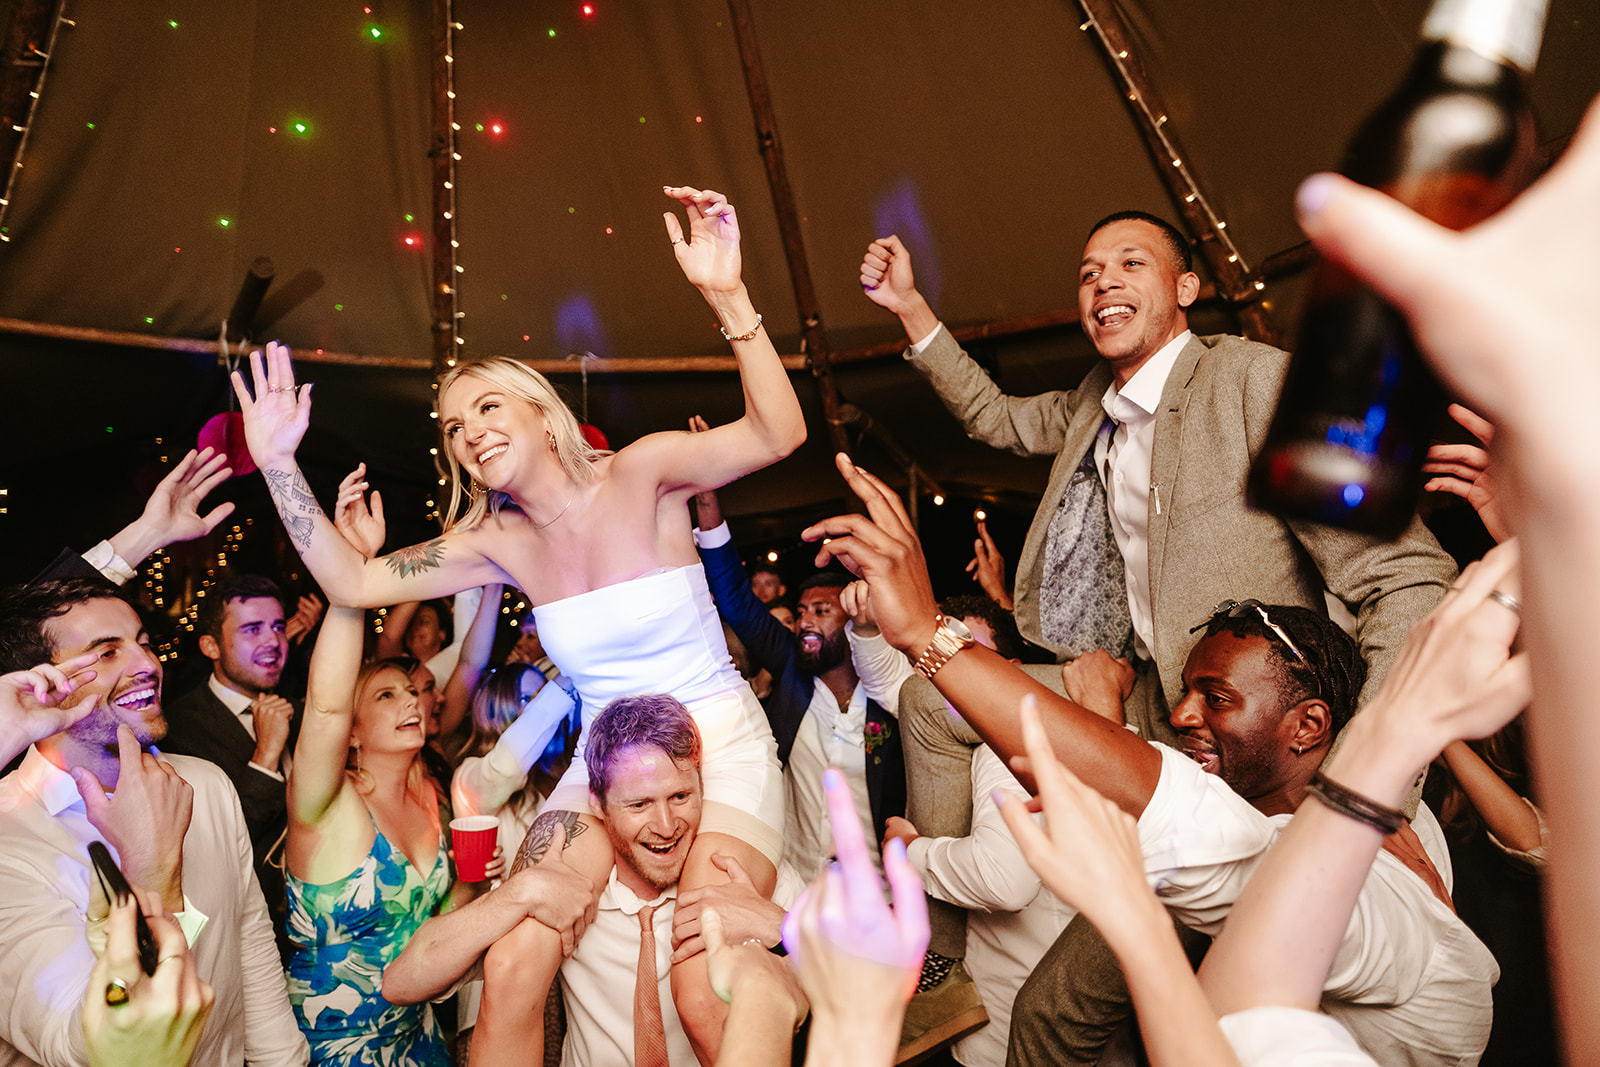 A couple dancing on the shoulders of guests during the wedding reception